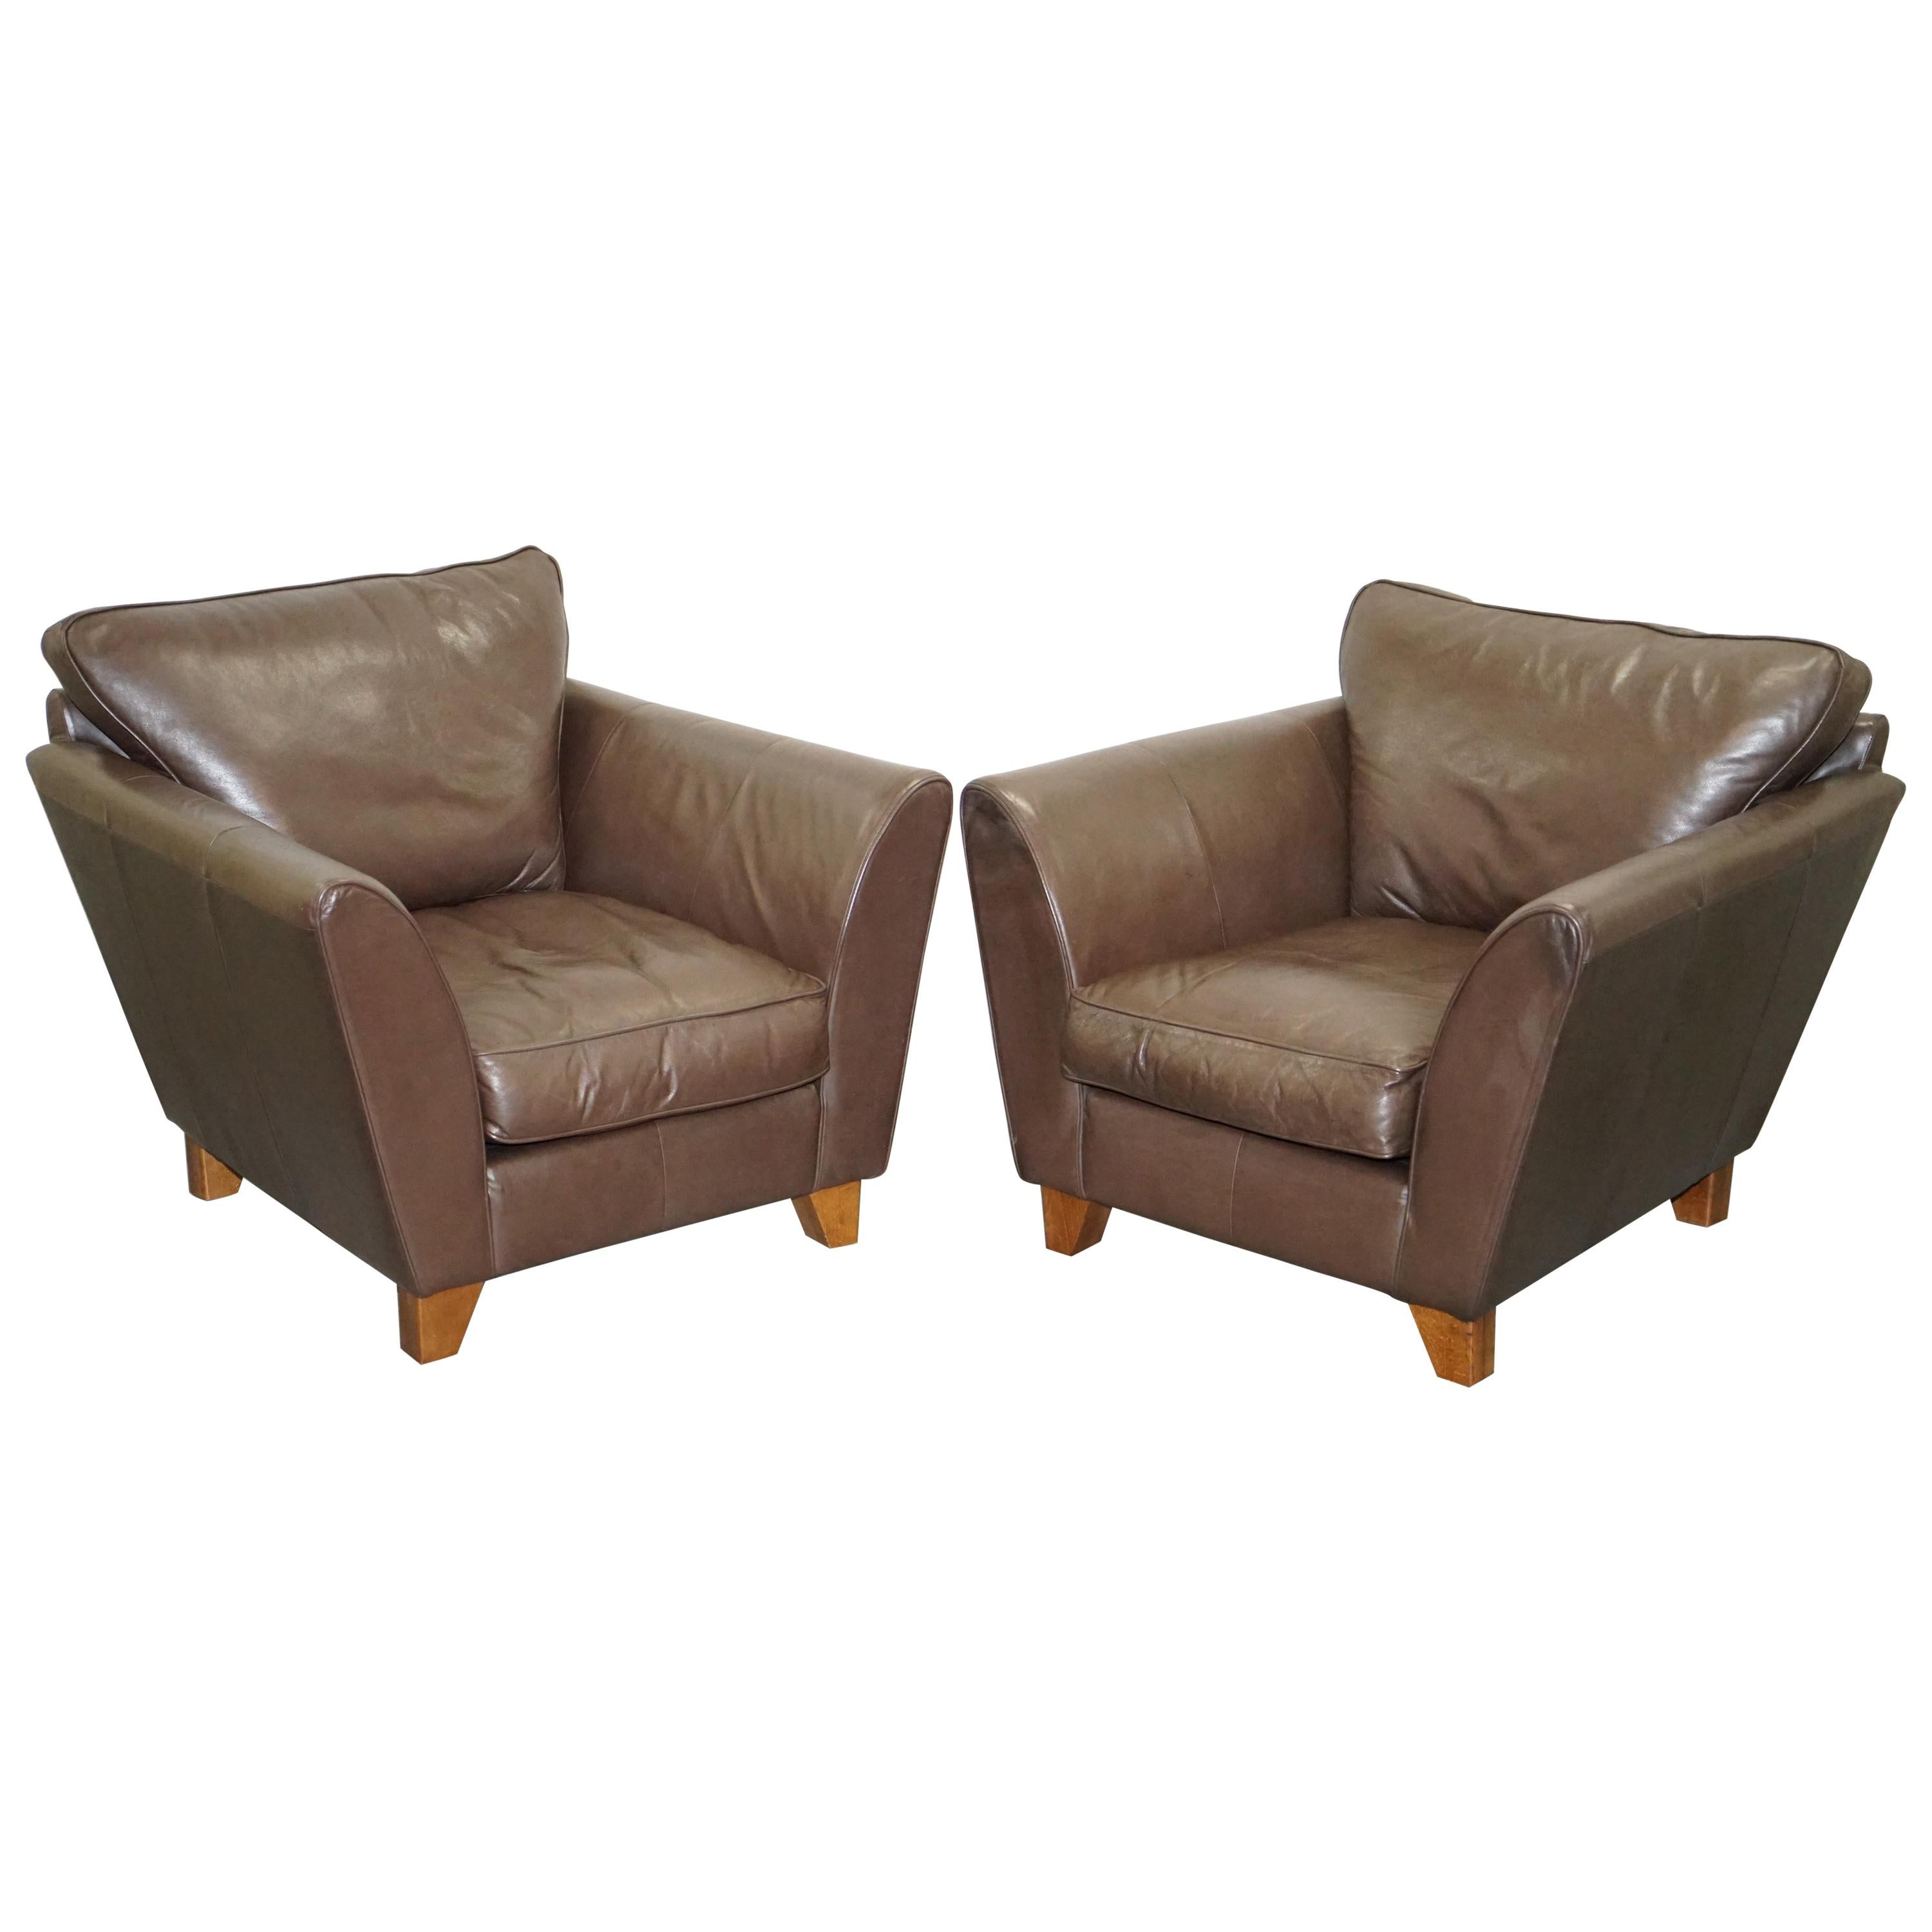 Pair of Brown Leather Armchairs Contemporary Club Armchairs Elegant Lines